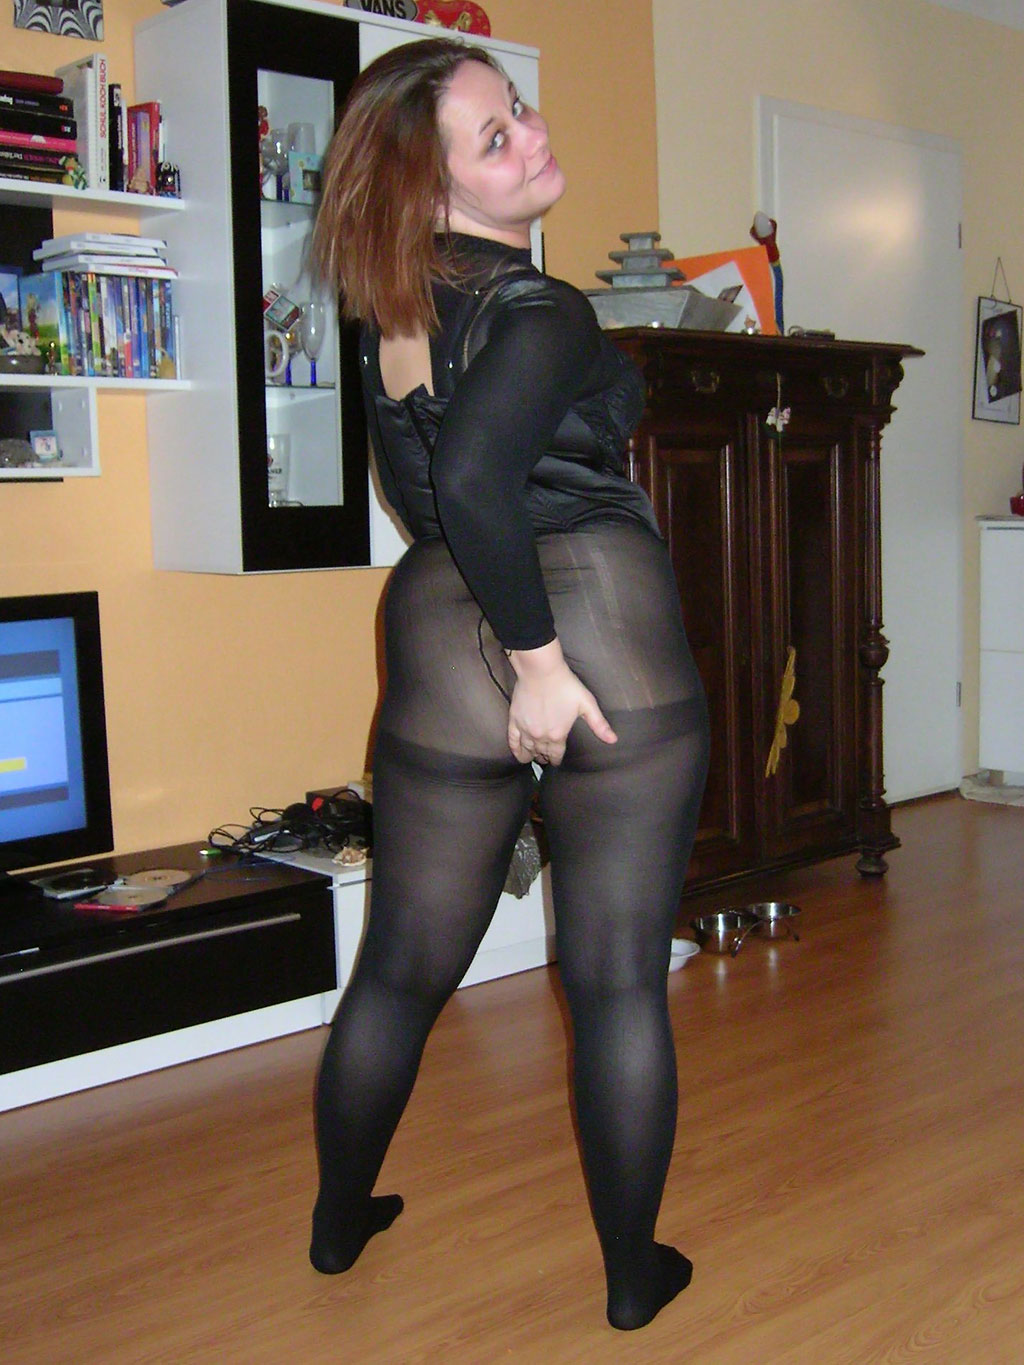 Real chubby amateur girls in pantyhose image